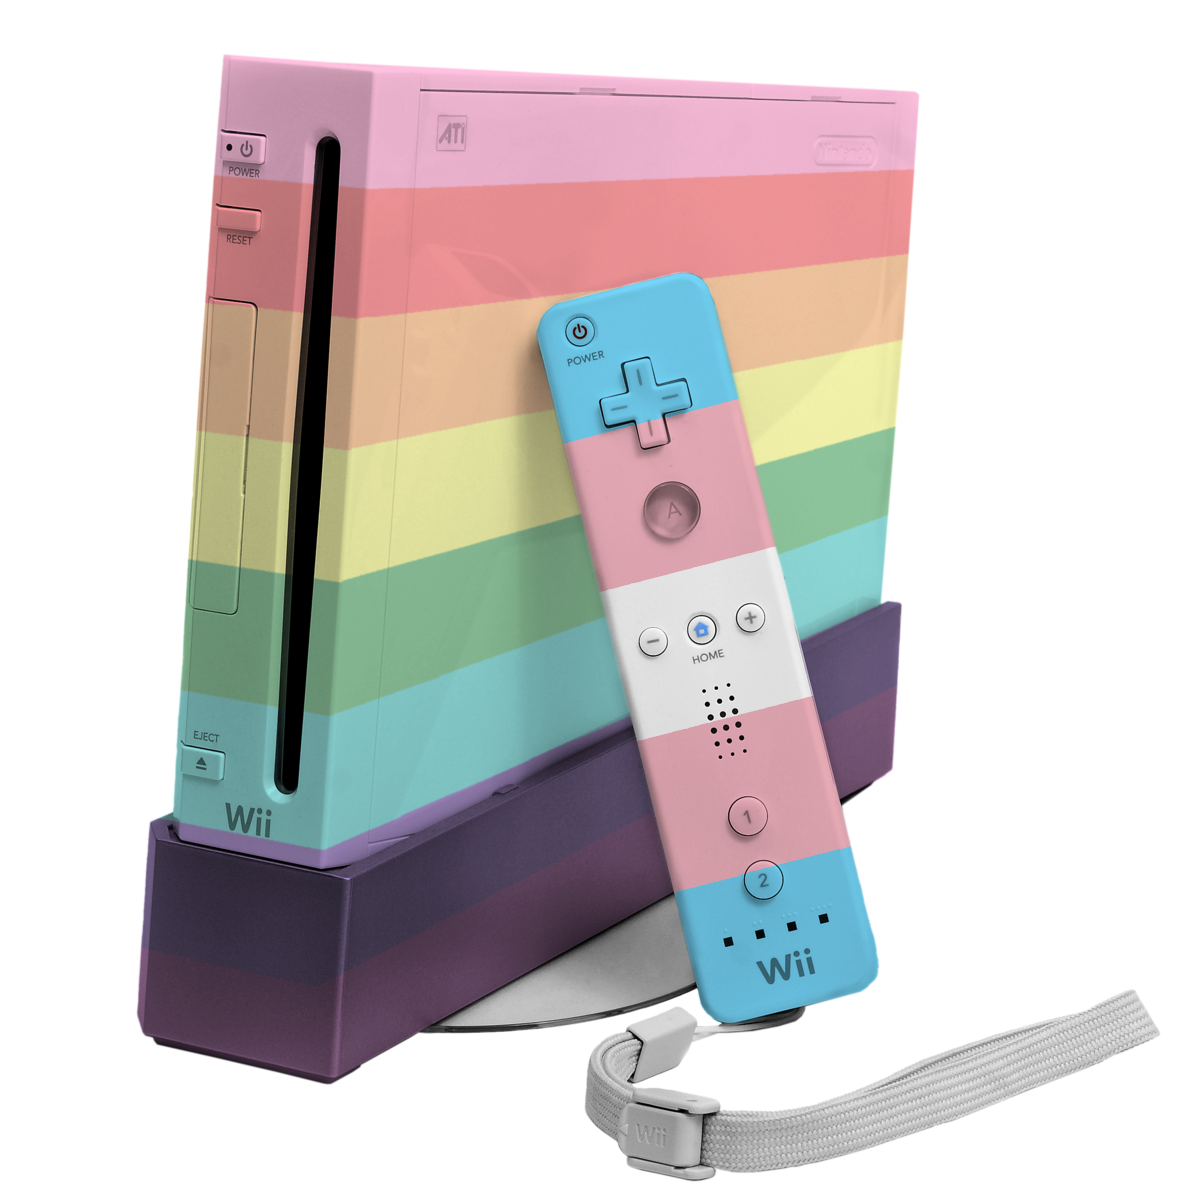 An image of a Nintendo Wii console and Wii Remote. The console has the Gilber Baker pride flag overlayed on it, and the remote has the transgender pride flag.